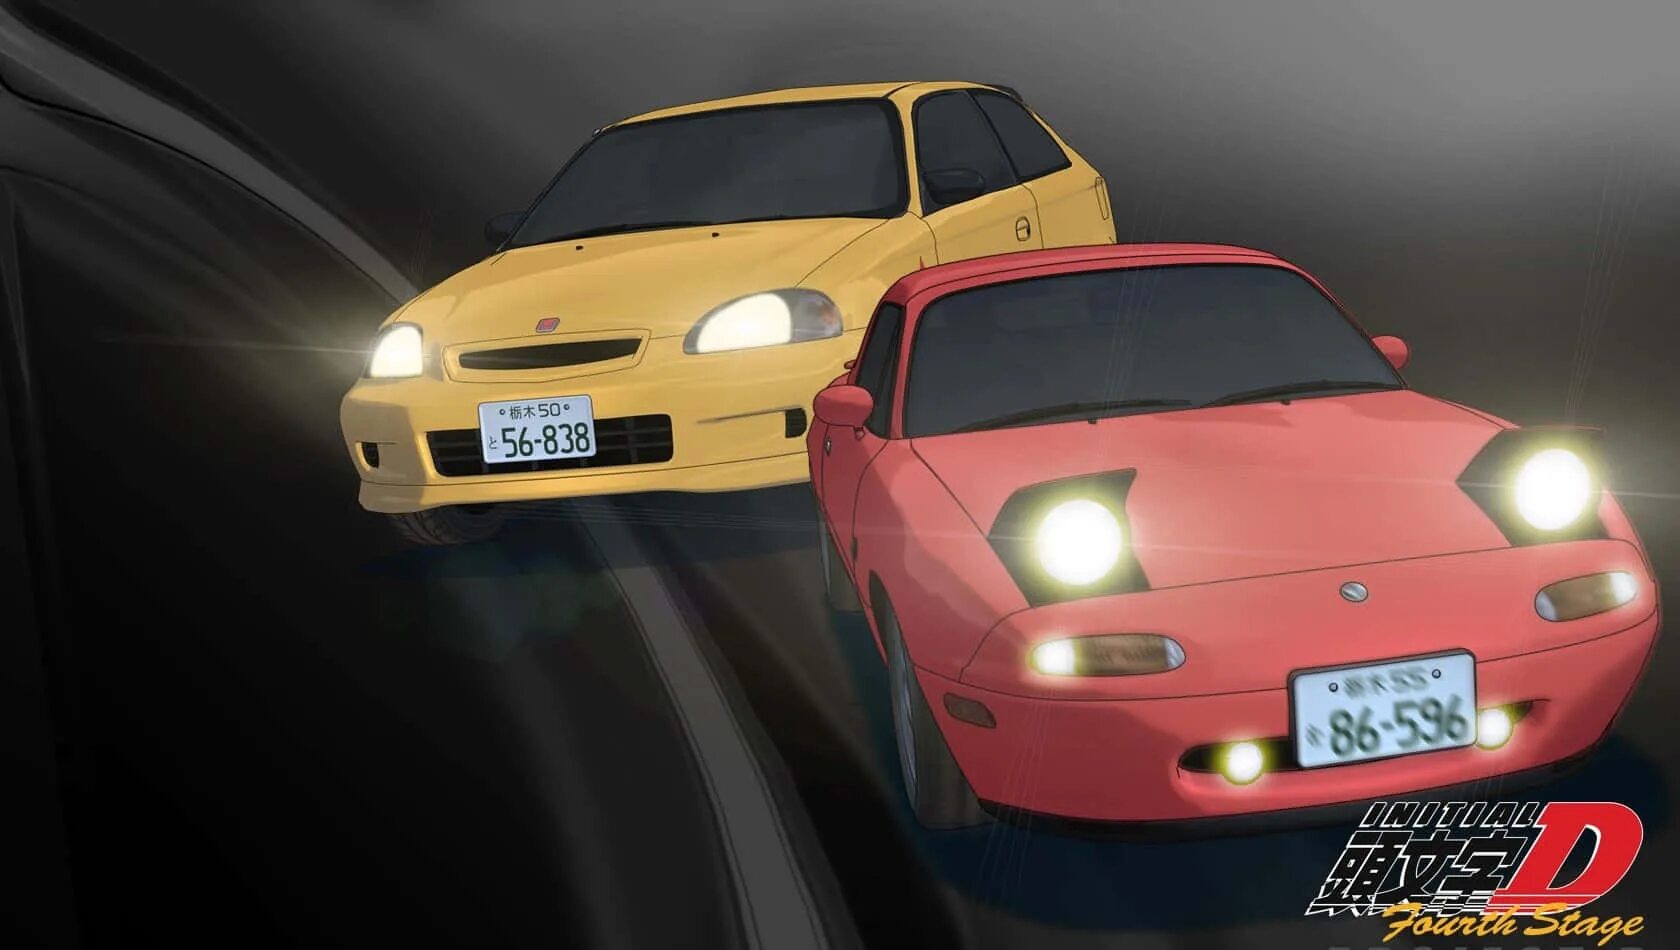 Initial final. Initial d 4 Stage. Initial d Stage 4 машины. Mitsubishi EVO 4 initial d. Initial d - 4th Stage.